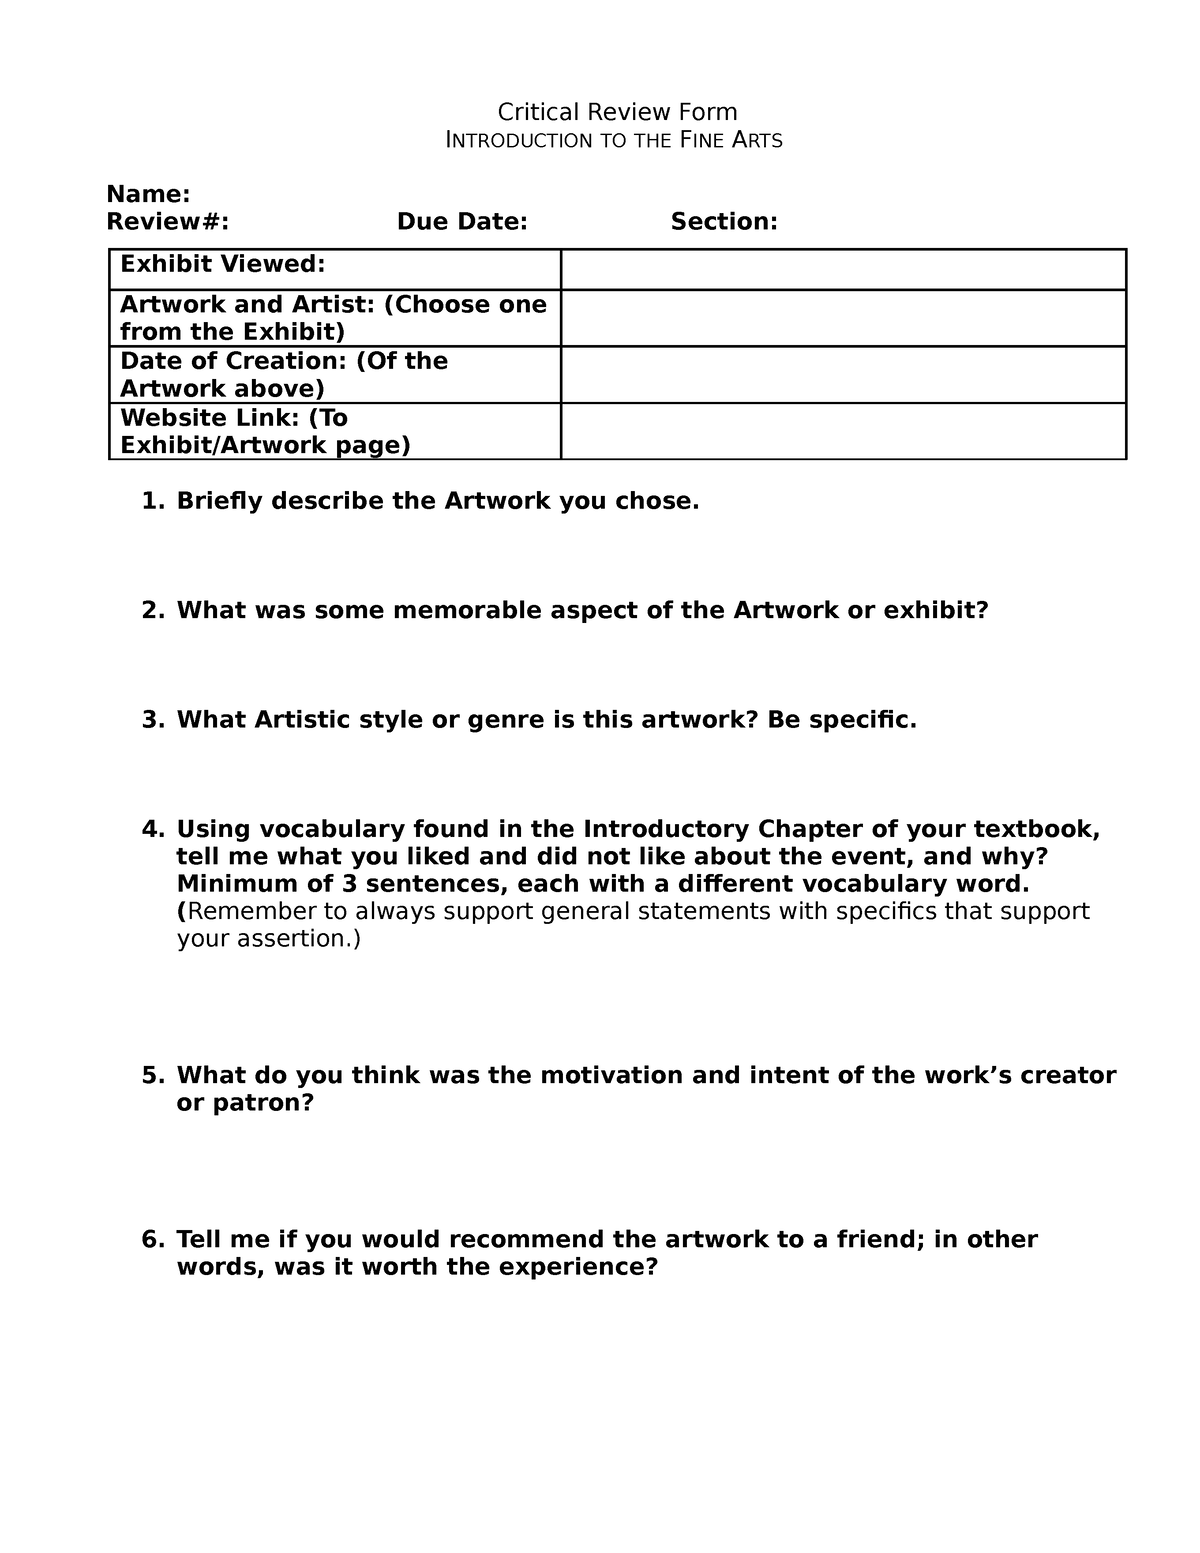 Art Critical Review 2 2 Critical Review Form Introduction To The Fine Arts Name Review Due